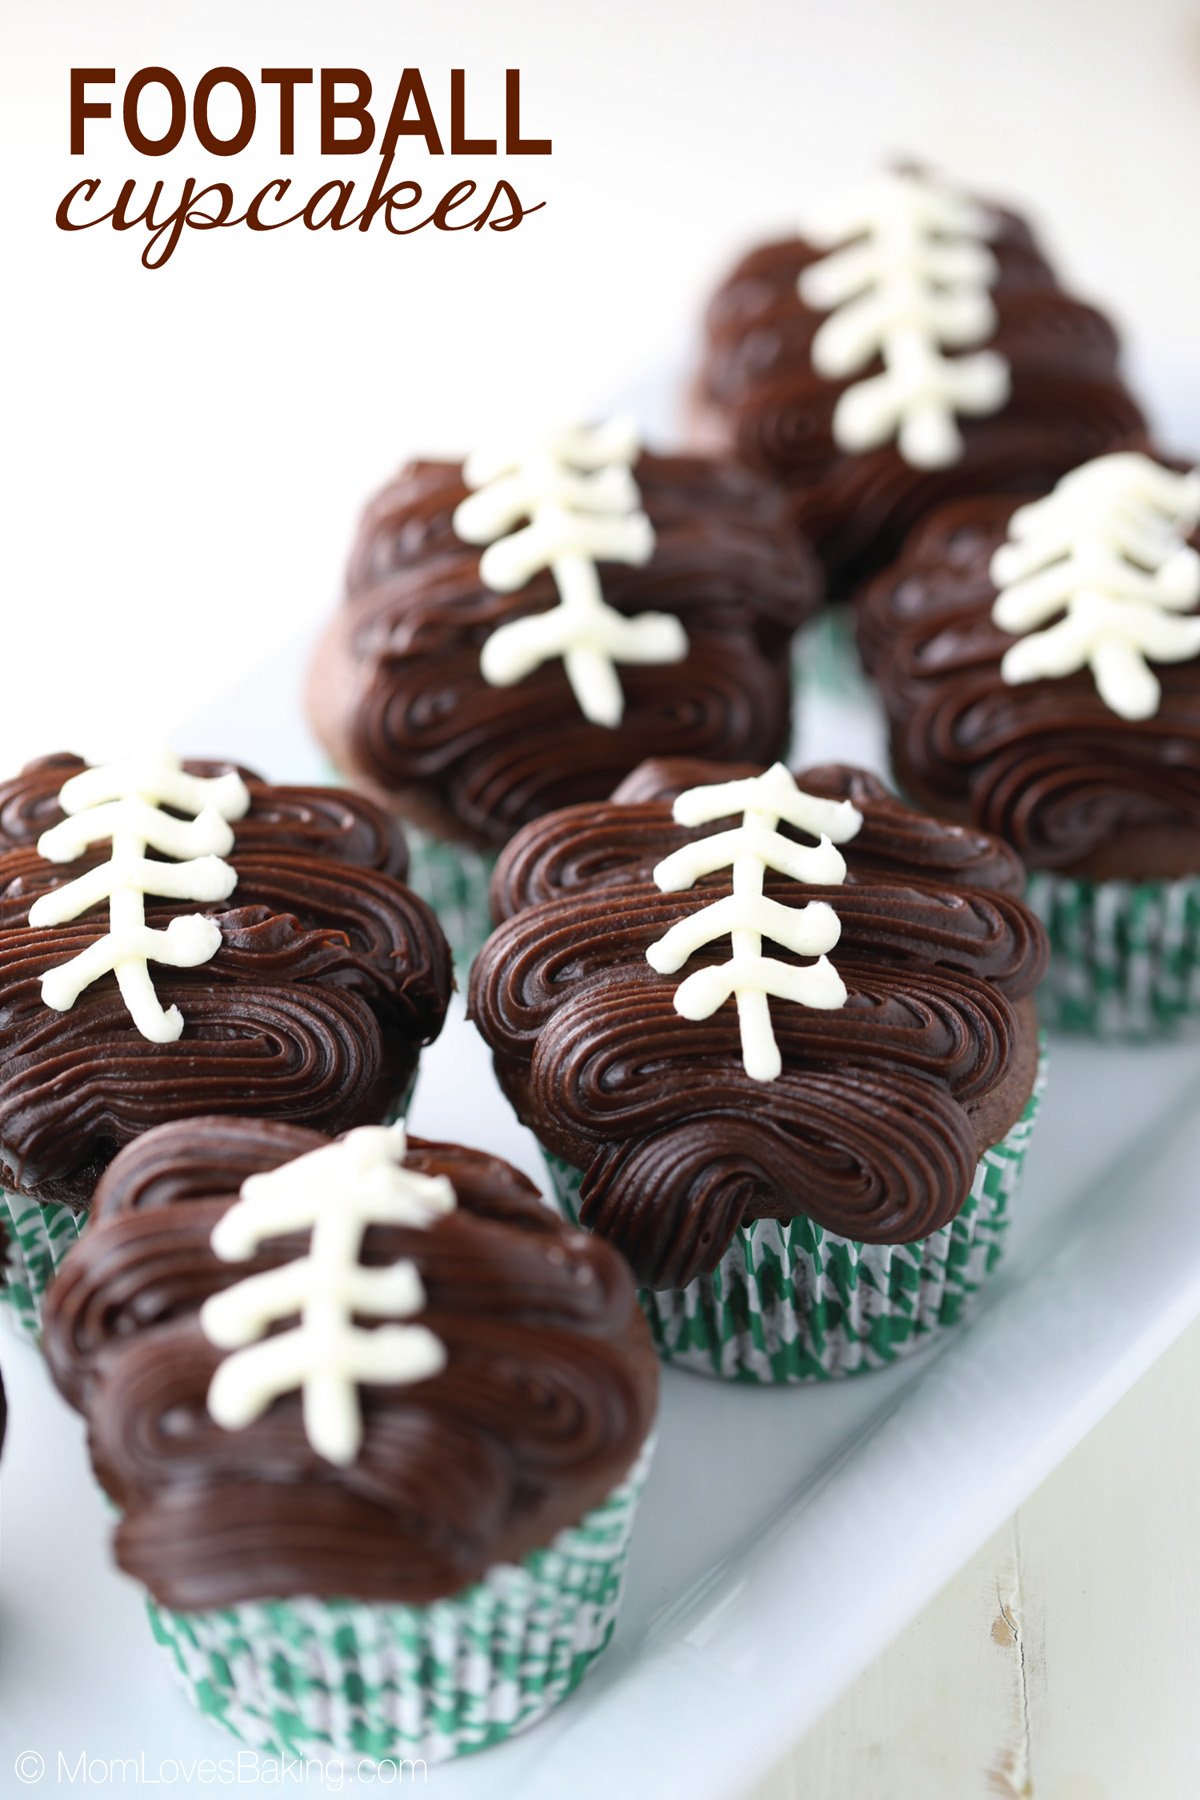 Football cupcakes with chocolate ganache frosting shaped like a football.